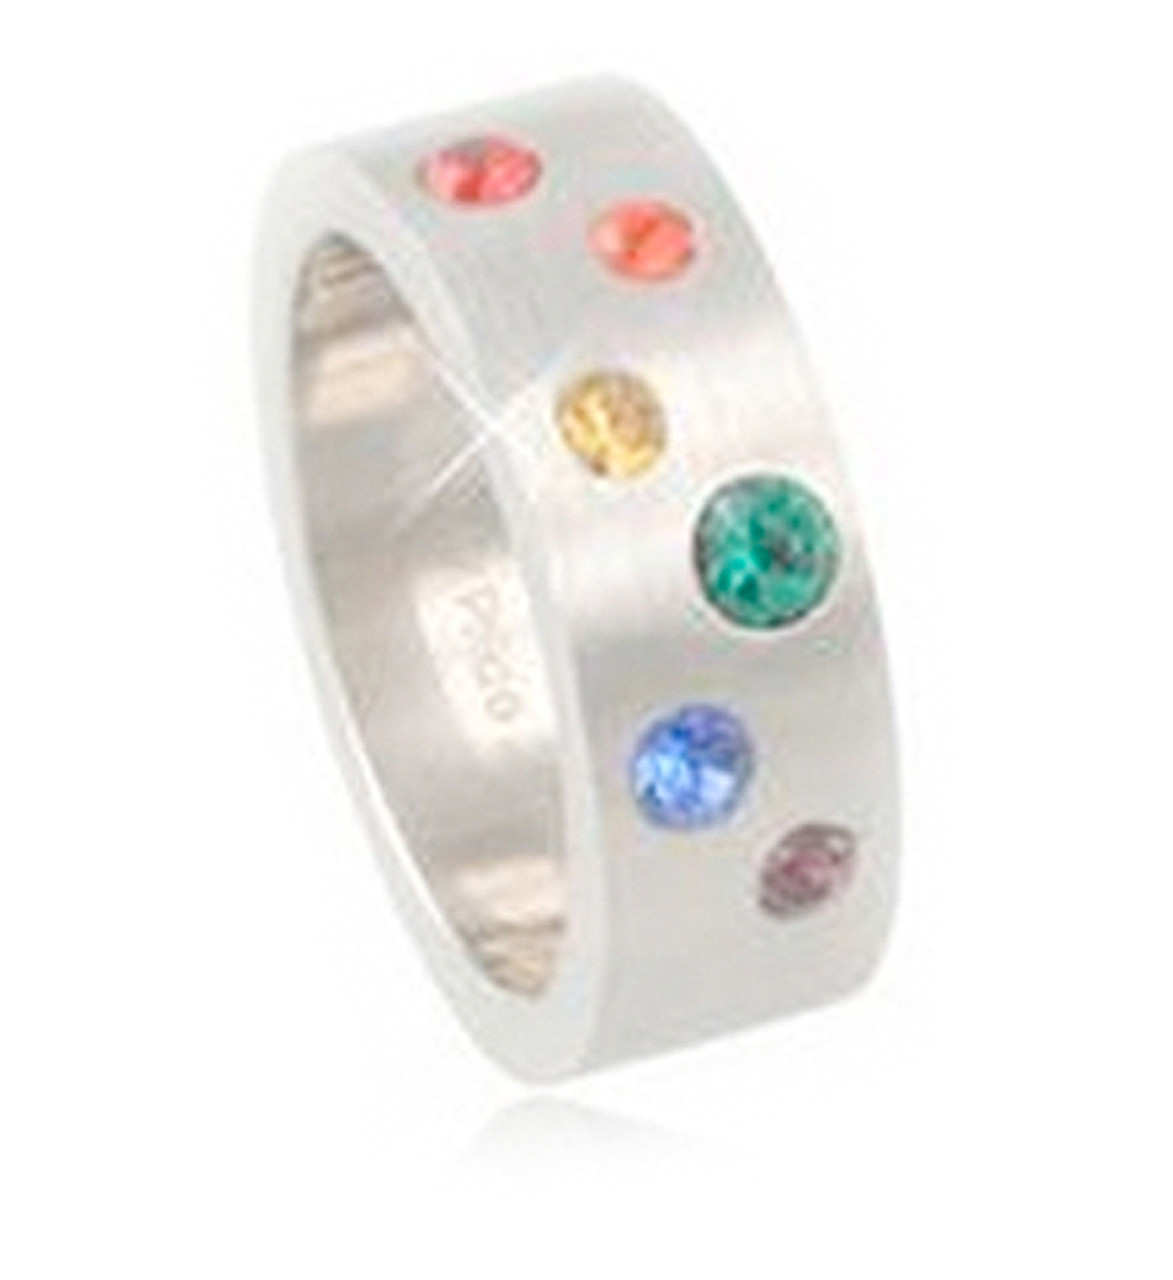 A Half Scattered CZ Rainbow Ring - LGBT Jewelry - Gay and Lesbian Pride Ring  gay ring, rainbow rings, gay pride rings, lesbian pride rings, pride rings, pride rings, LGBTQ ring, LGBT rings, pride jewelry,  pride jewellery, gay jewellery, gay flag ring, gay men ring, pride ring, lesbian jewelry,
